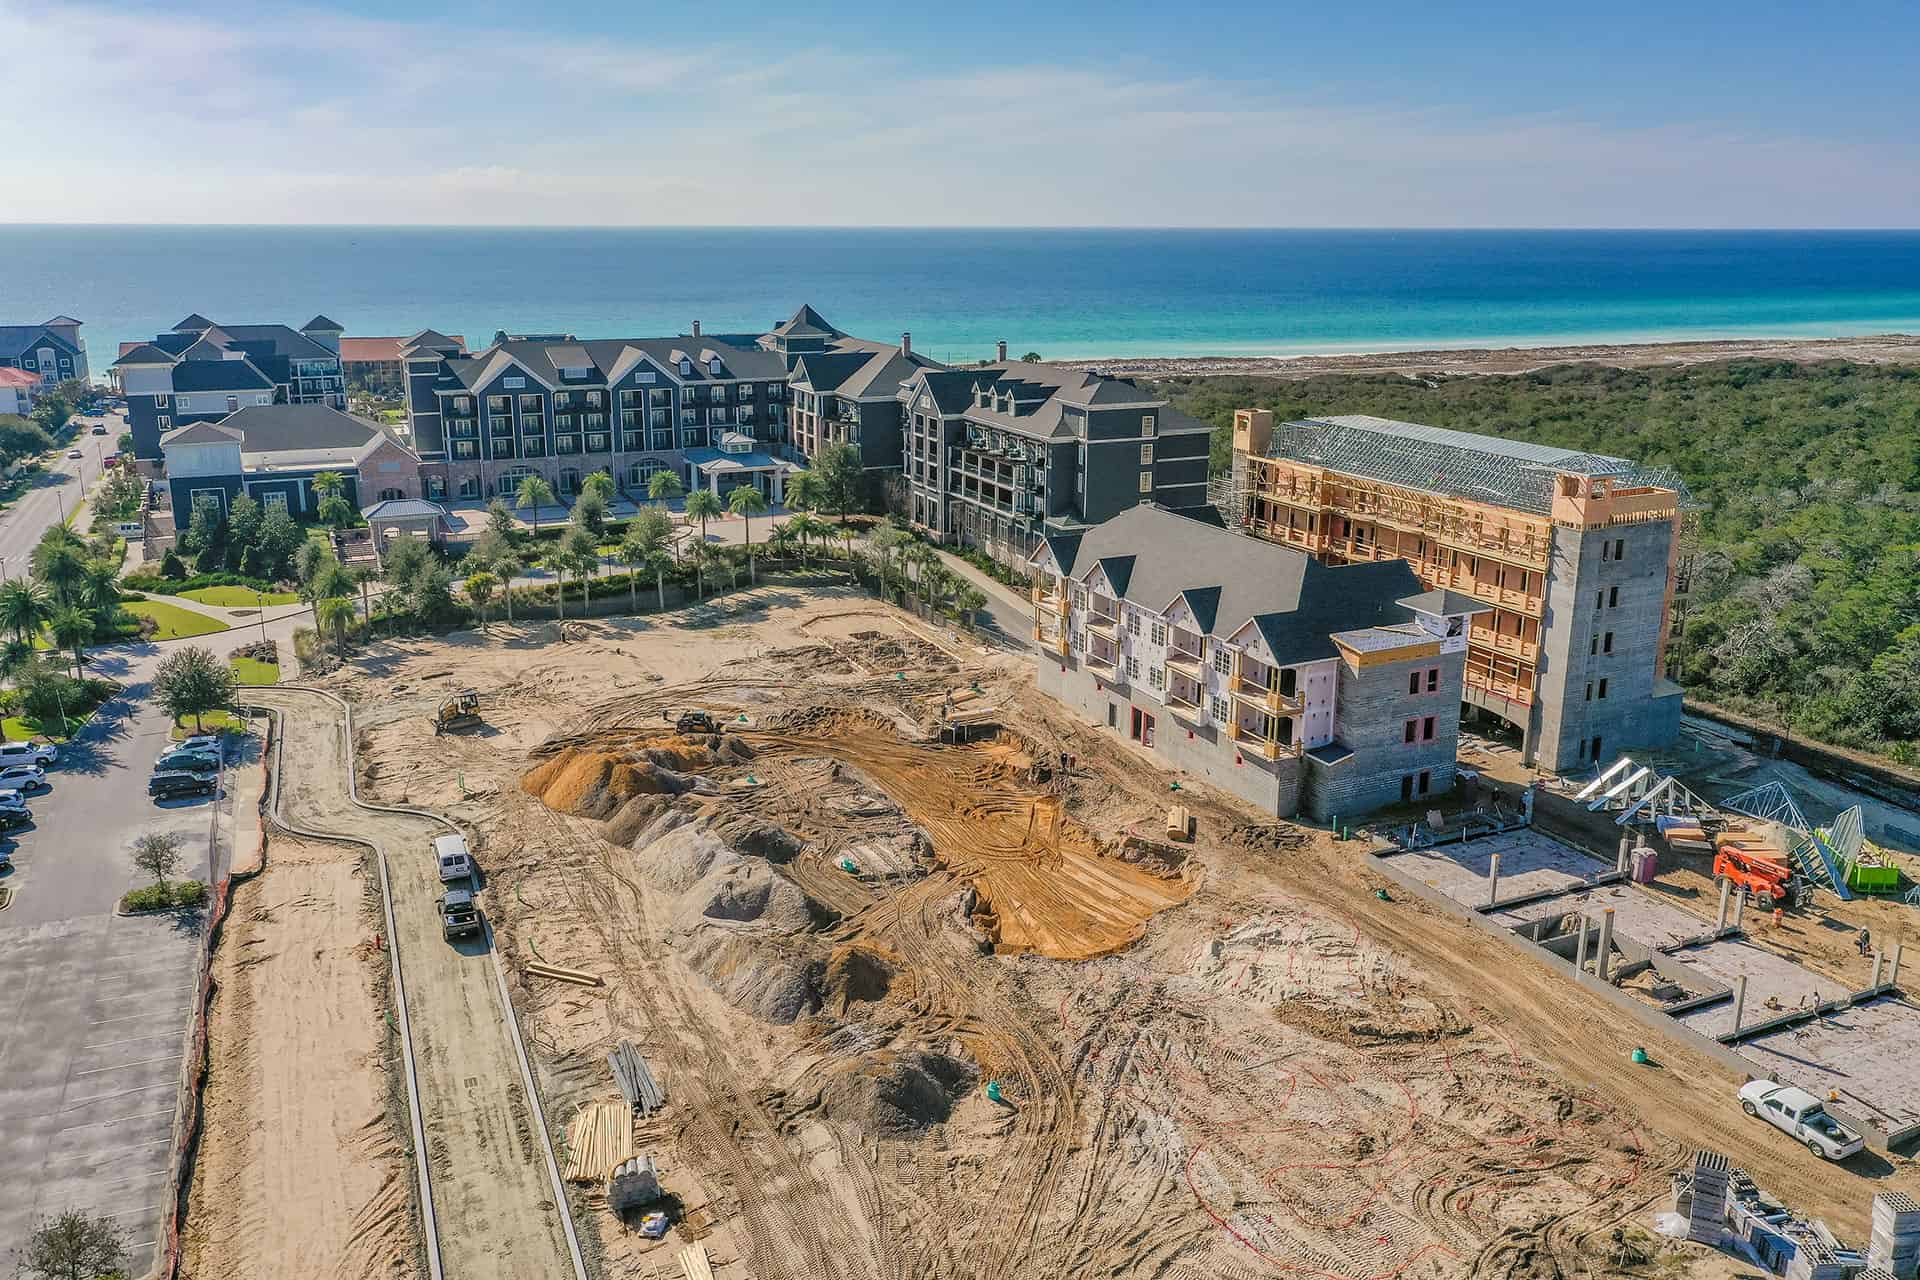 Parkside_at_Henderson_Beach_Resort_January_2021 drone photo looking south